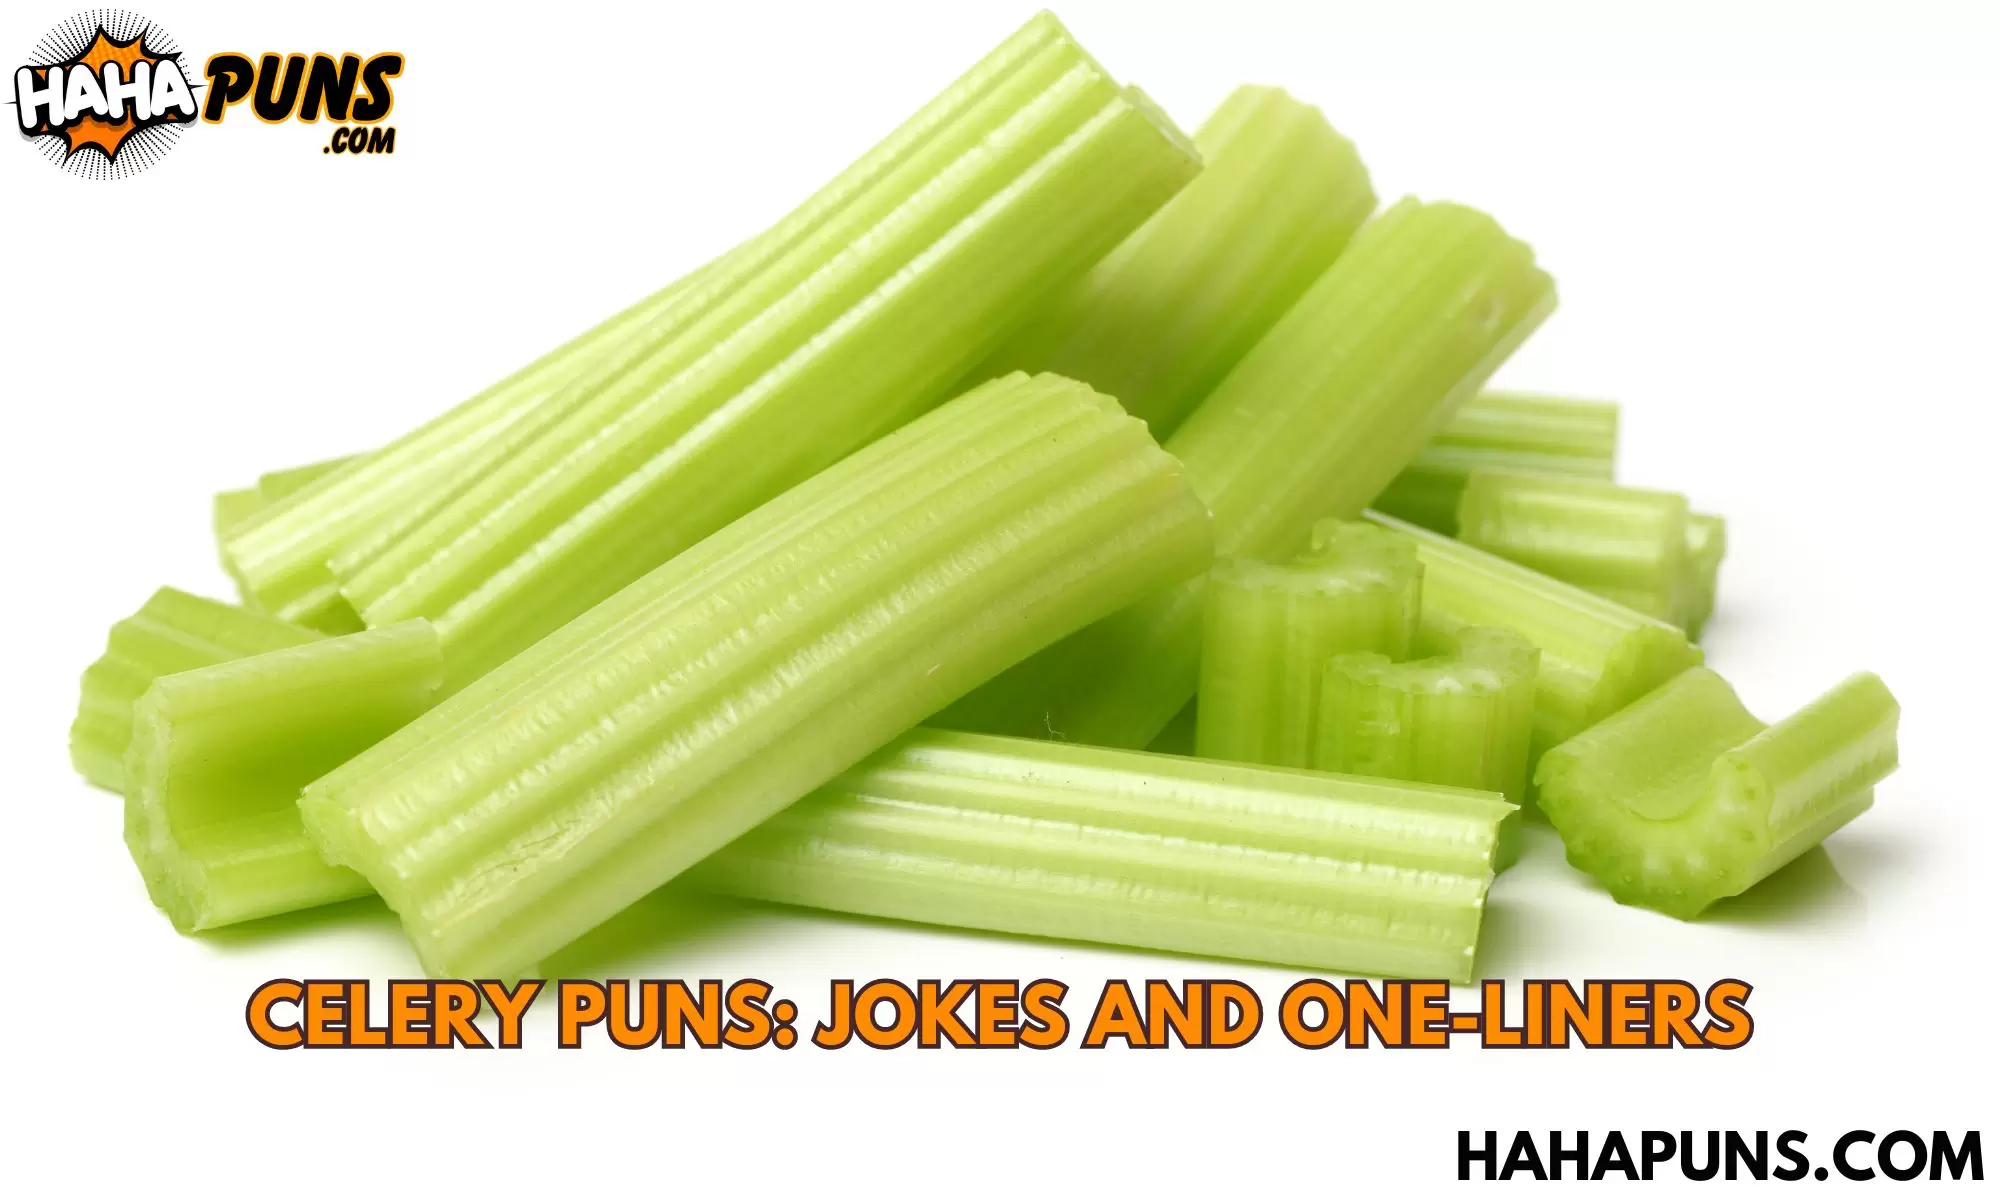 Celery Puns: Jokes and One-Liners